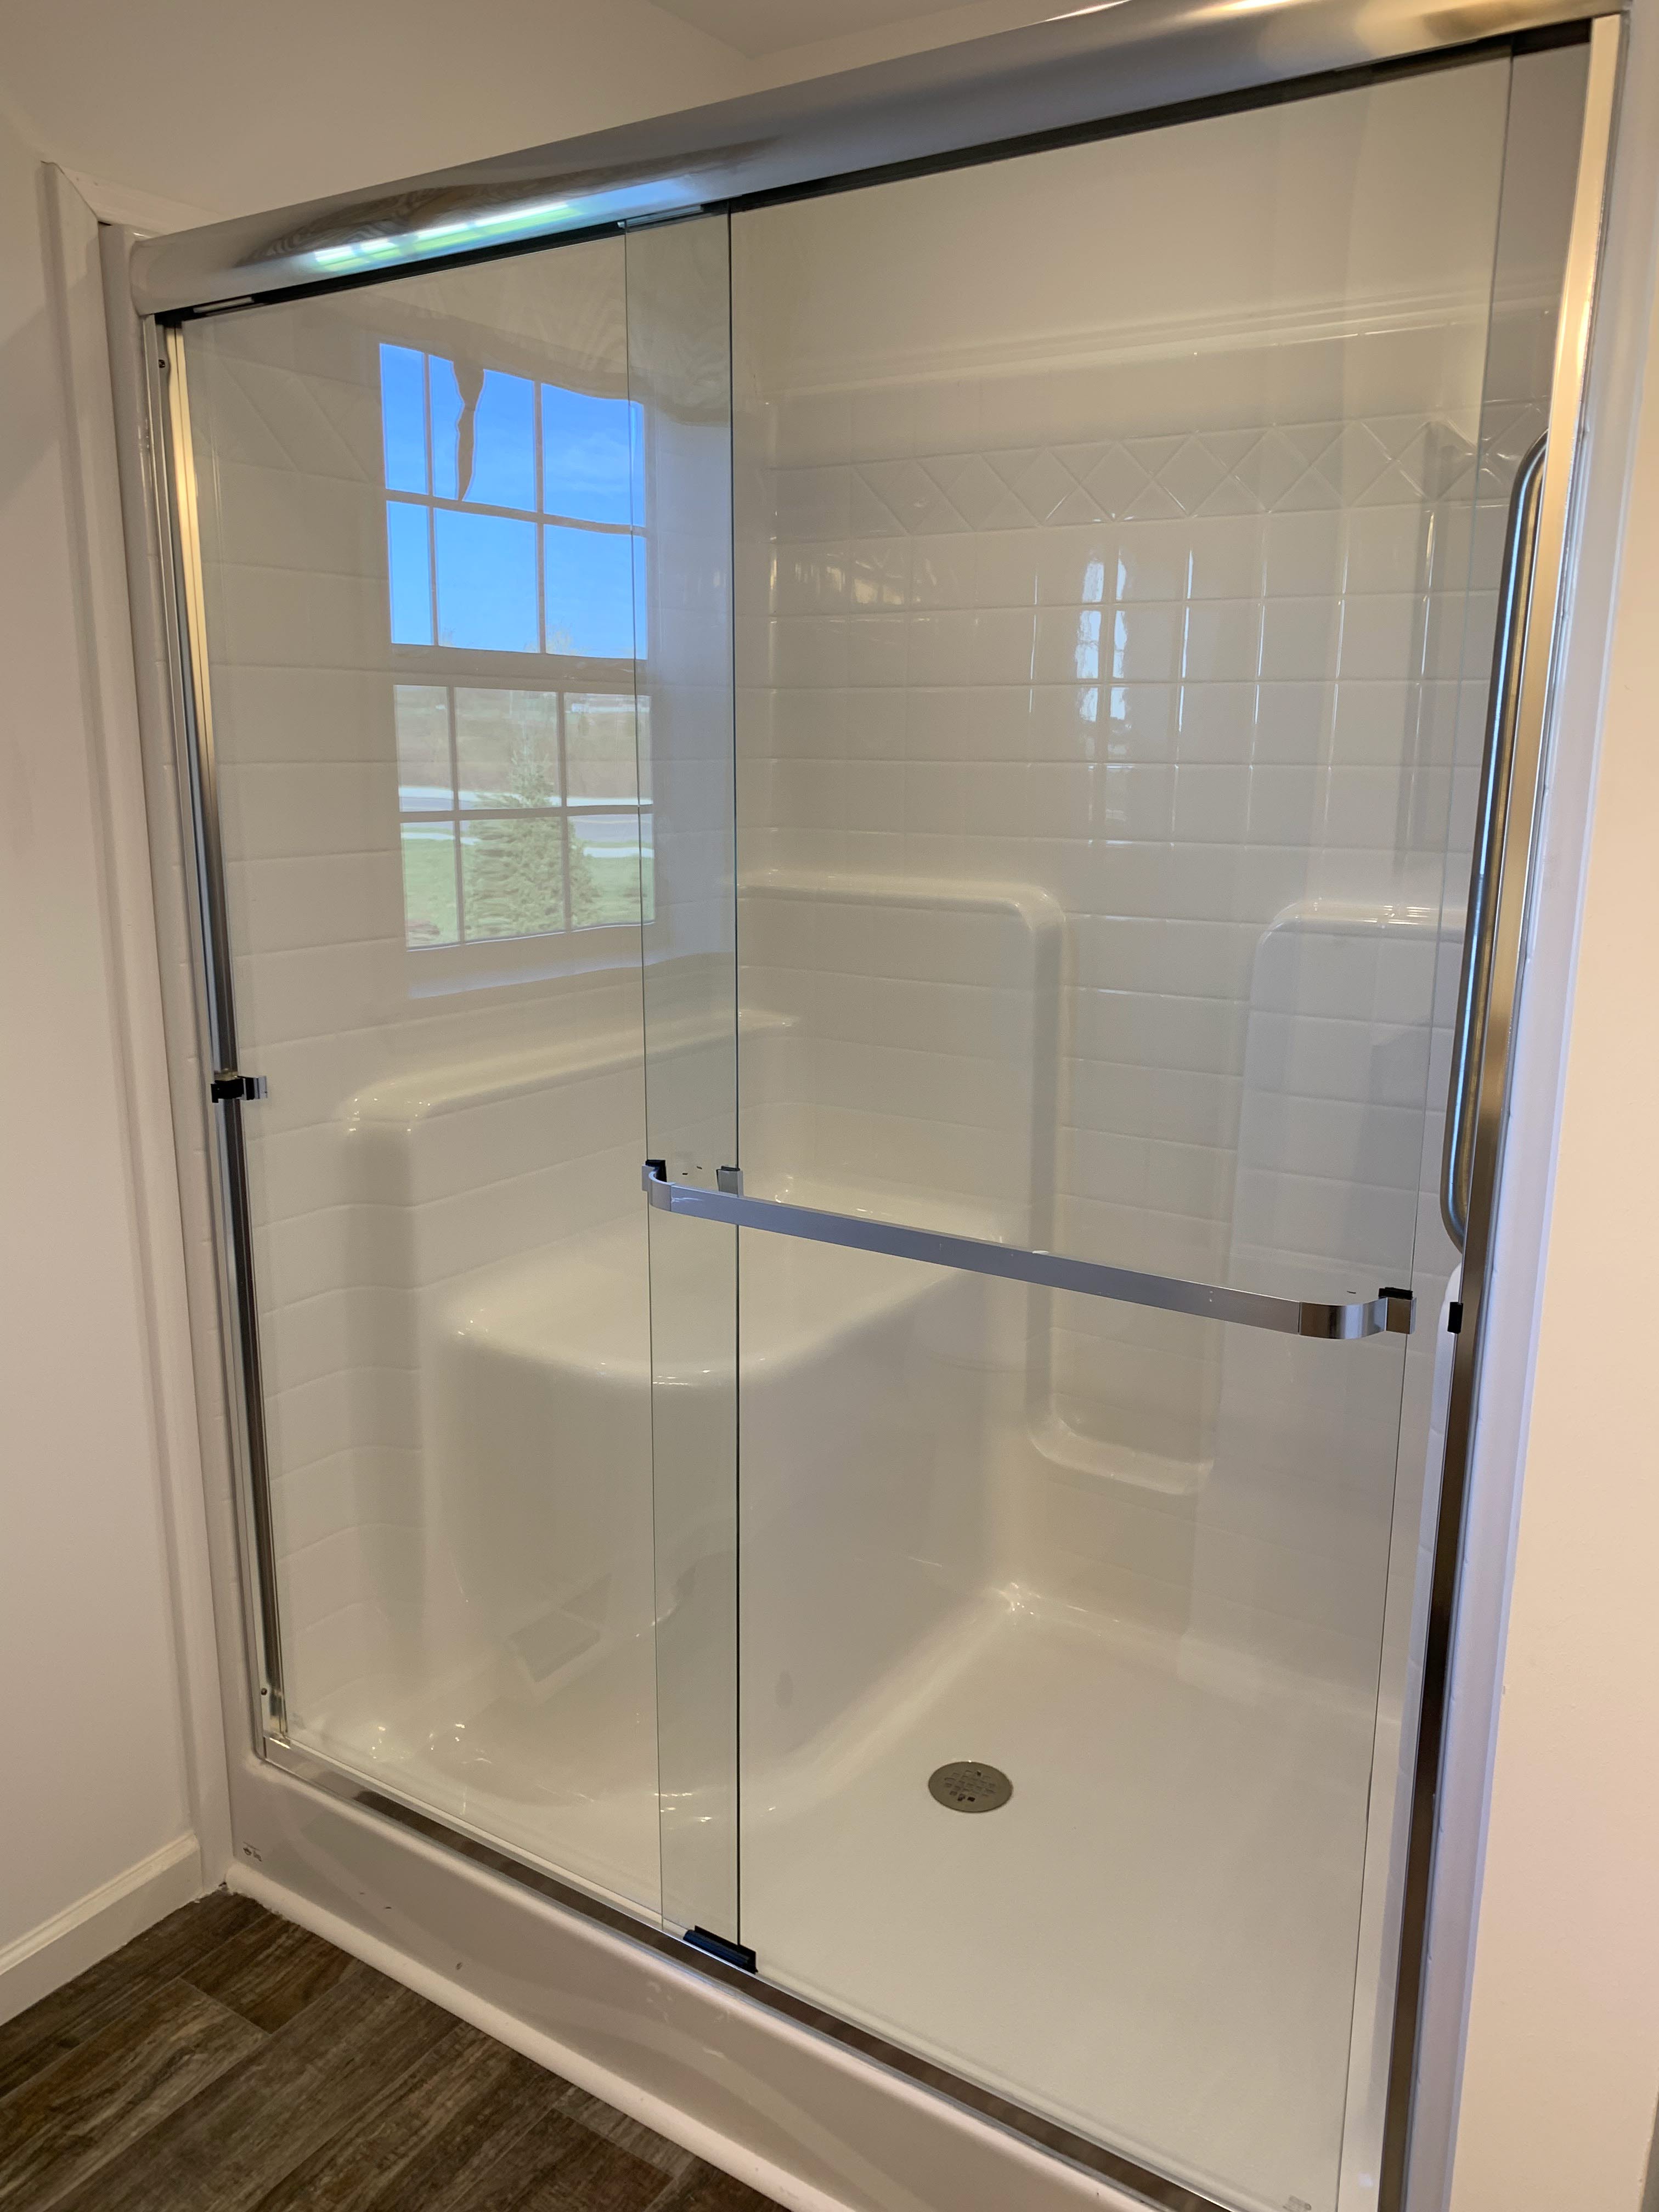 Primary shower with bench seat